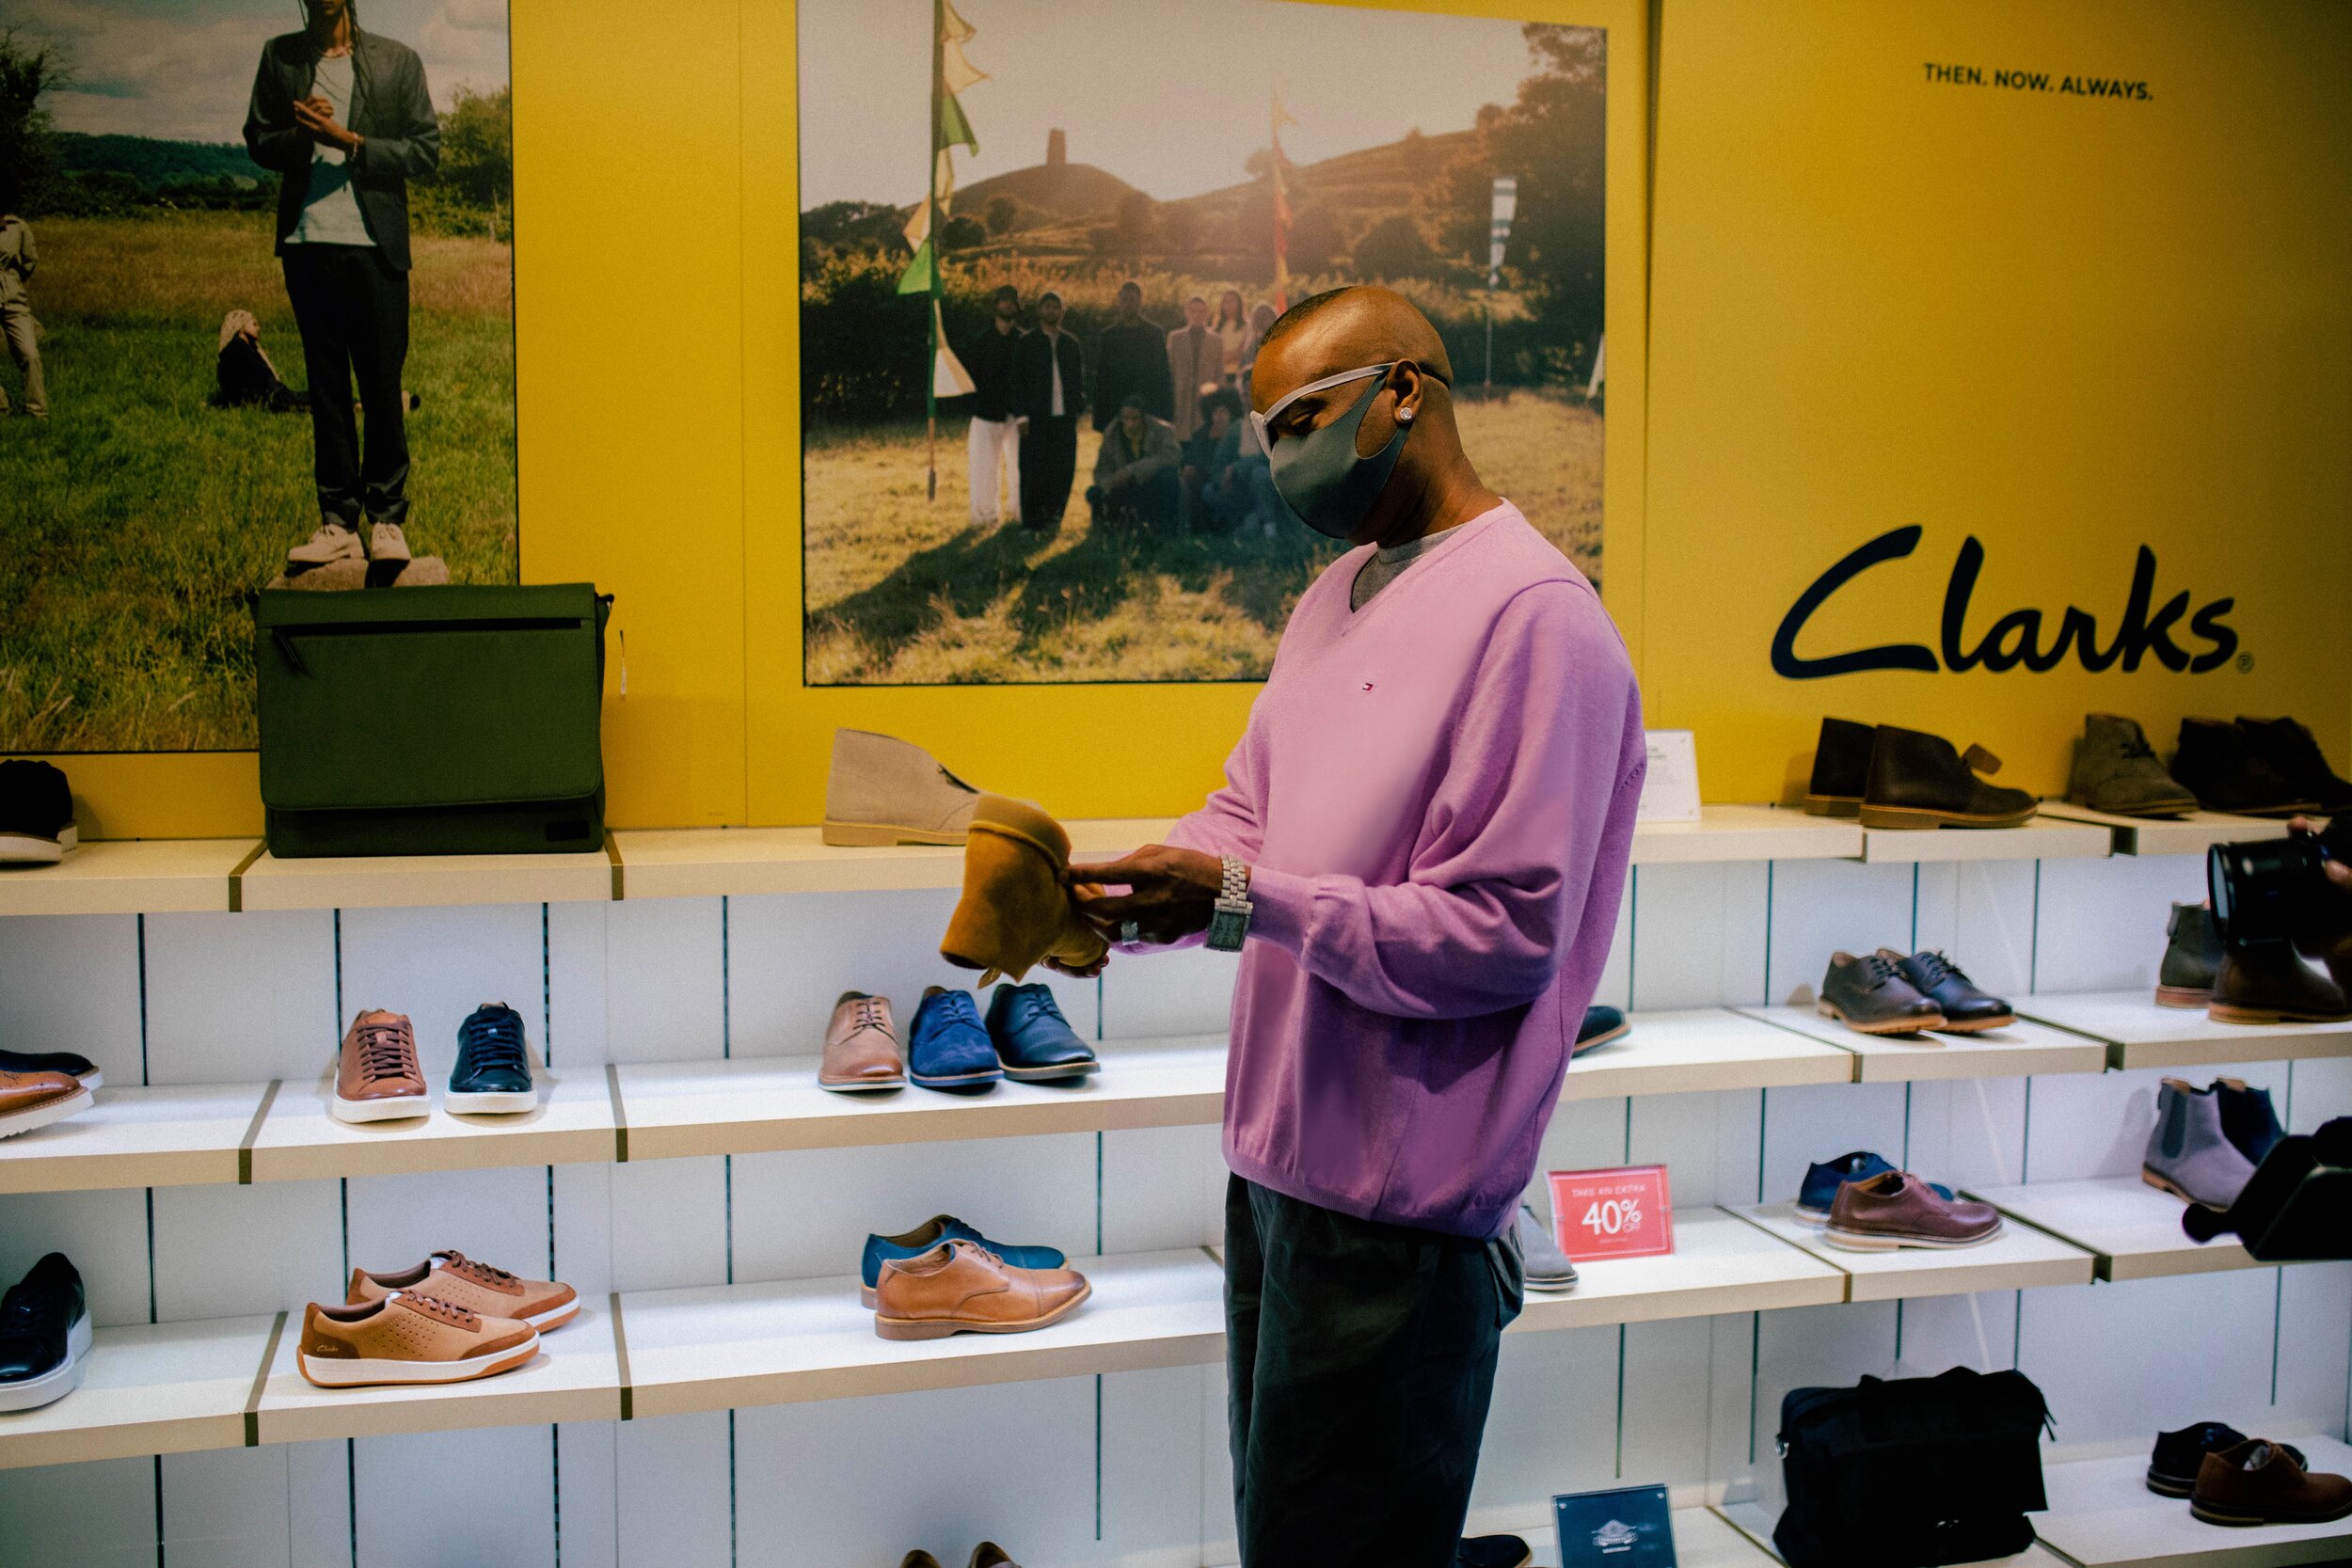 The Ruler In Clarks Store-NYC.jpeg